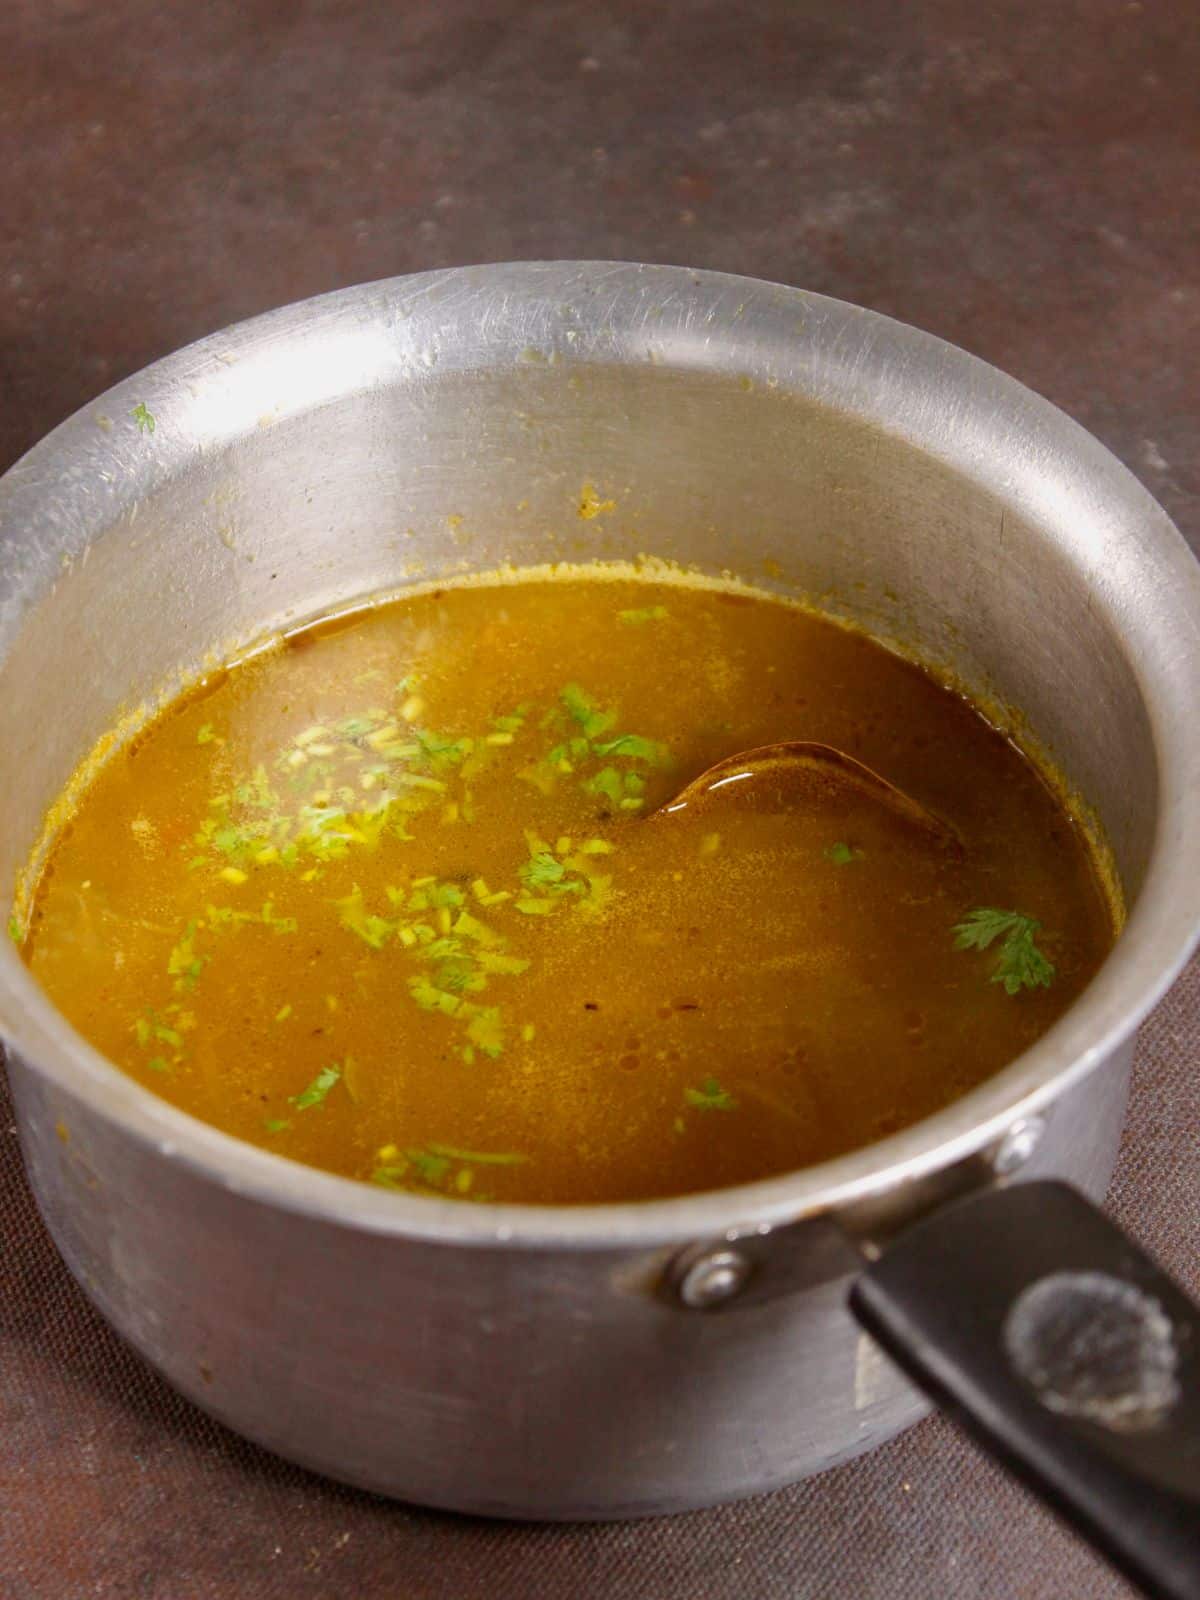 add chopped coriander leaves to the soup and cook 